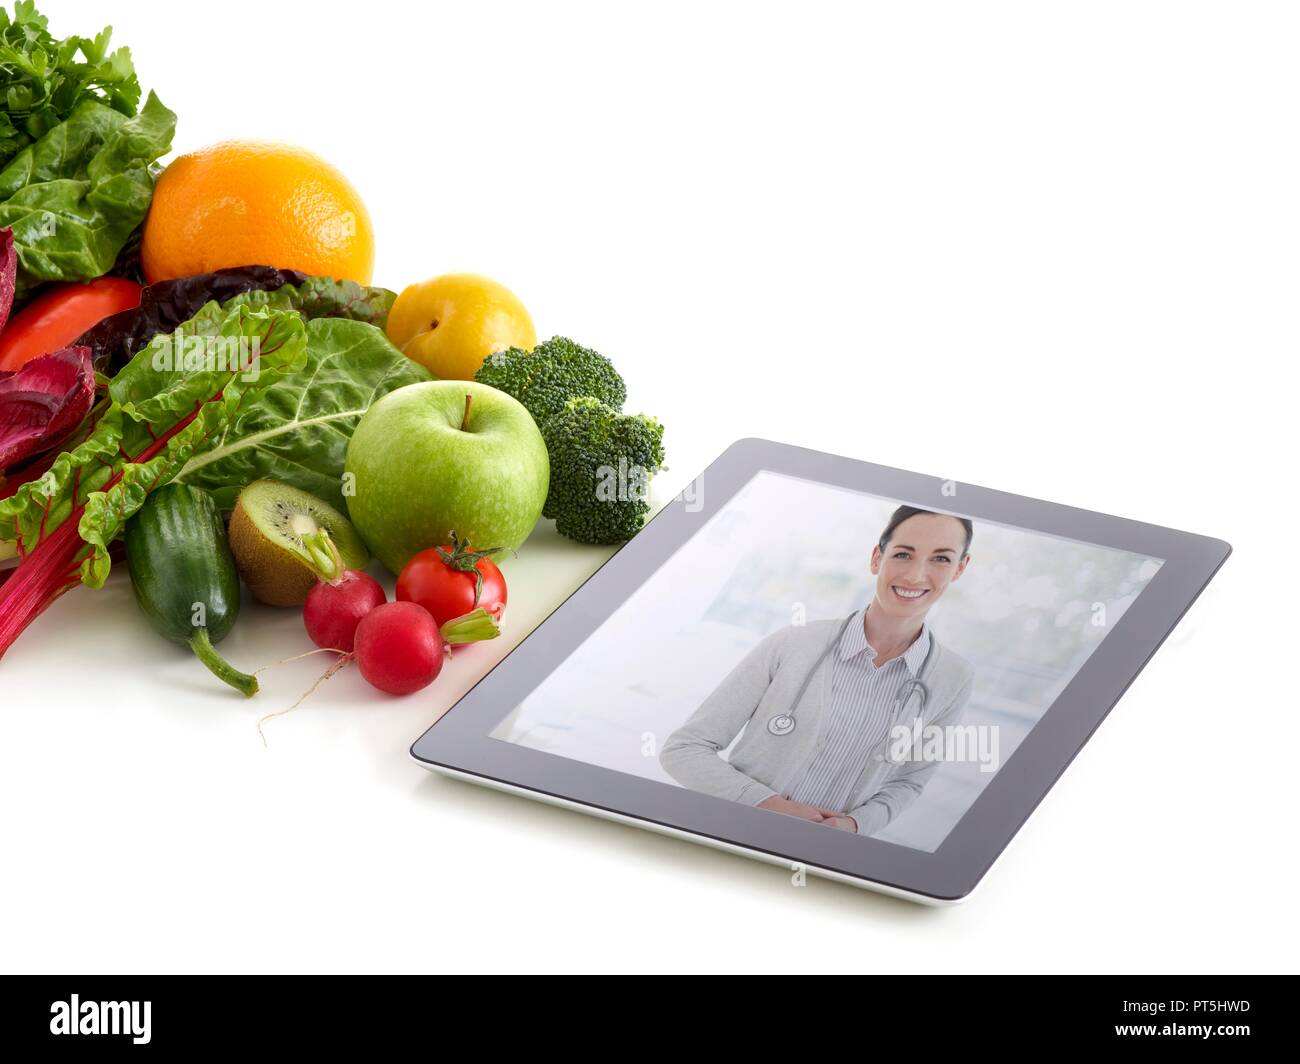 Fresh fruit and vegetables with doctor's image on digital tablet, studio shot. Stock Photo